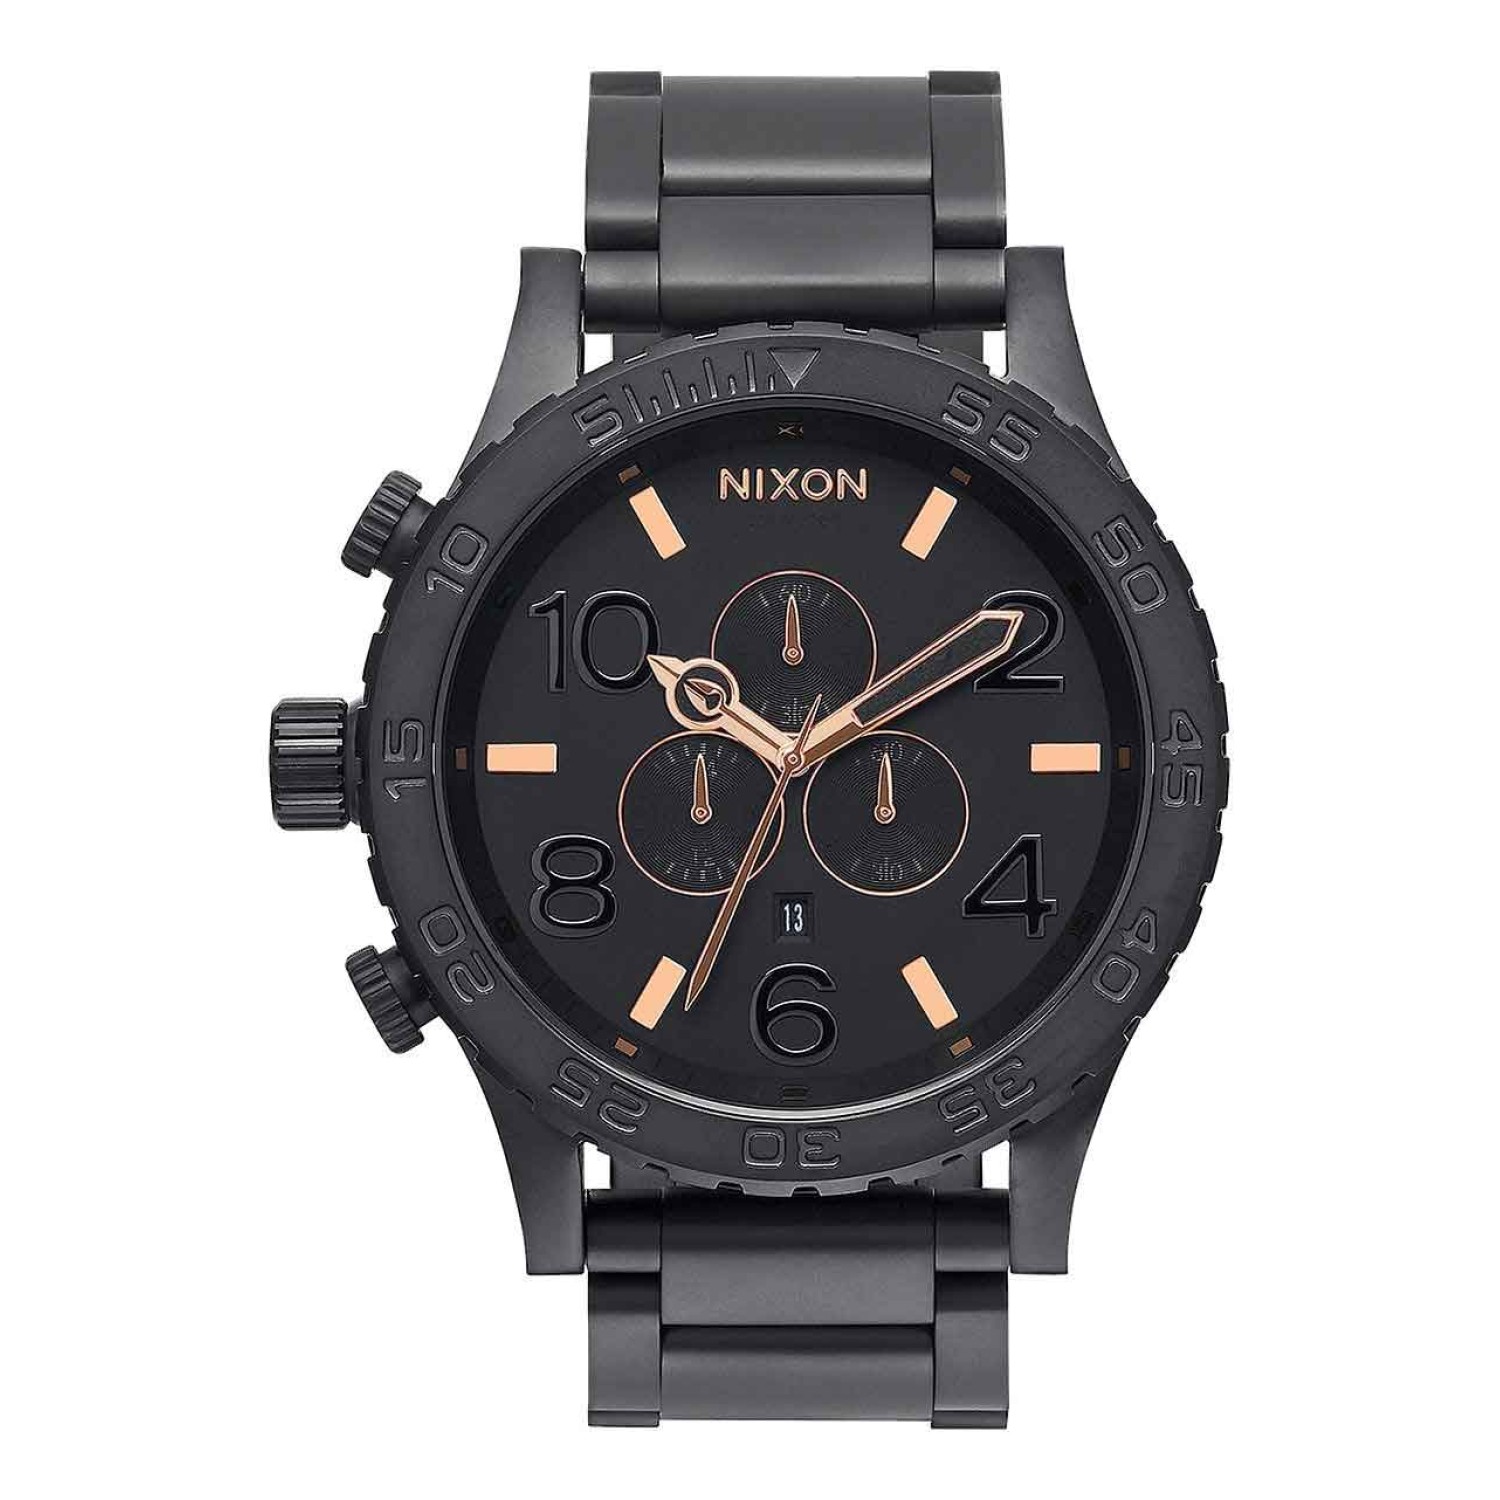 A083-957-00 NIXON Mens 51-30 Chronograph Watch. Good looks, brains and brawn combined. The 51-30 Chrono rates second-to-none. Handsome, easy-to-read 51 mm design that launched the oversized trend, with 3 CD textured sub-dials - All Black and Rose Gold Ton